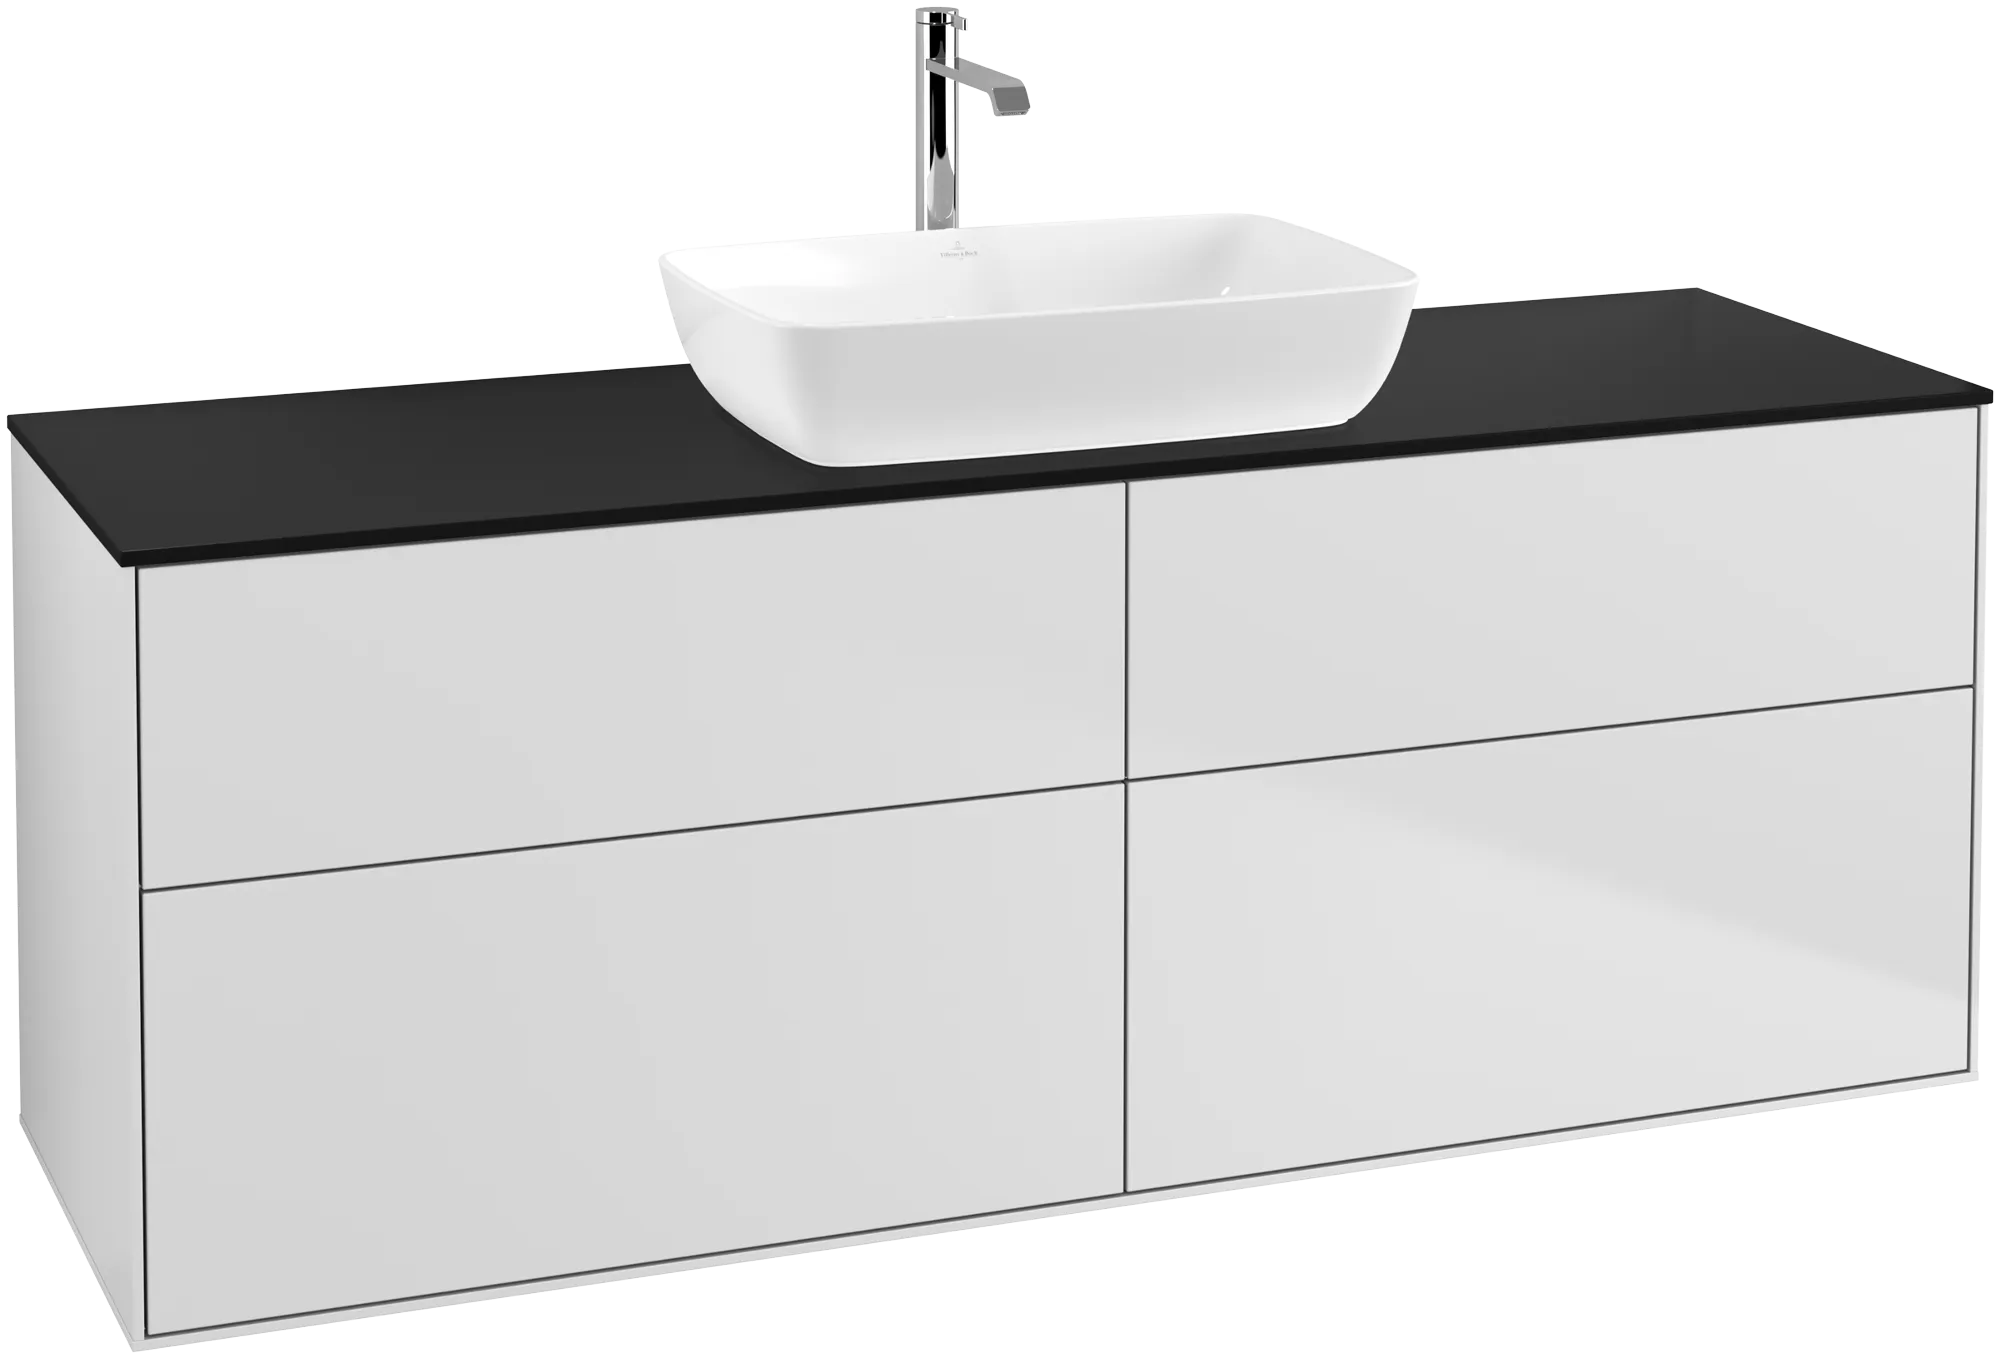 Picture of VILLEROY BOCH Finion Vanity unit, with lighting, 4 pull-out compartments, 1600 x 603 x 501 mm, White Matt Lacquer / Glass Black Matt #G85200MT